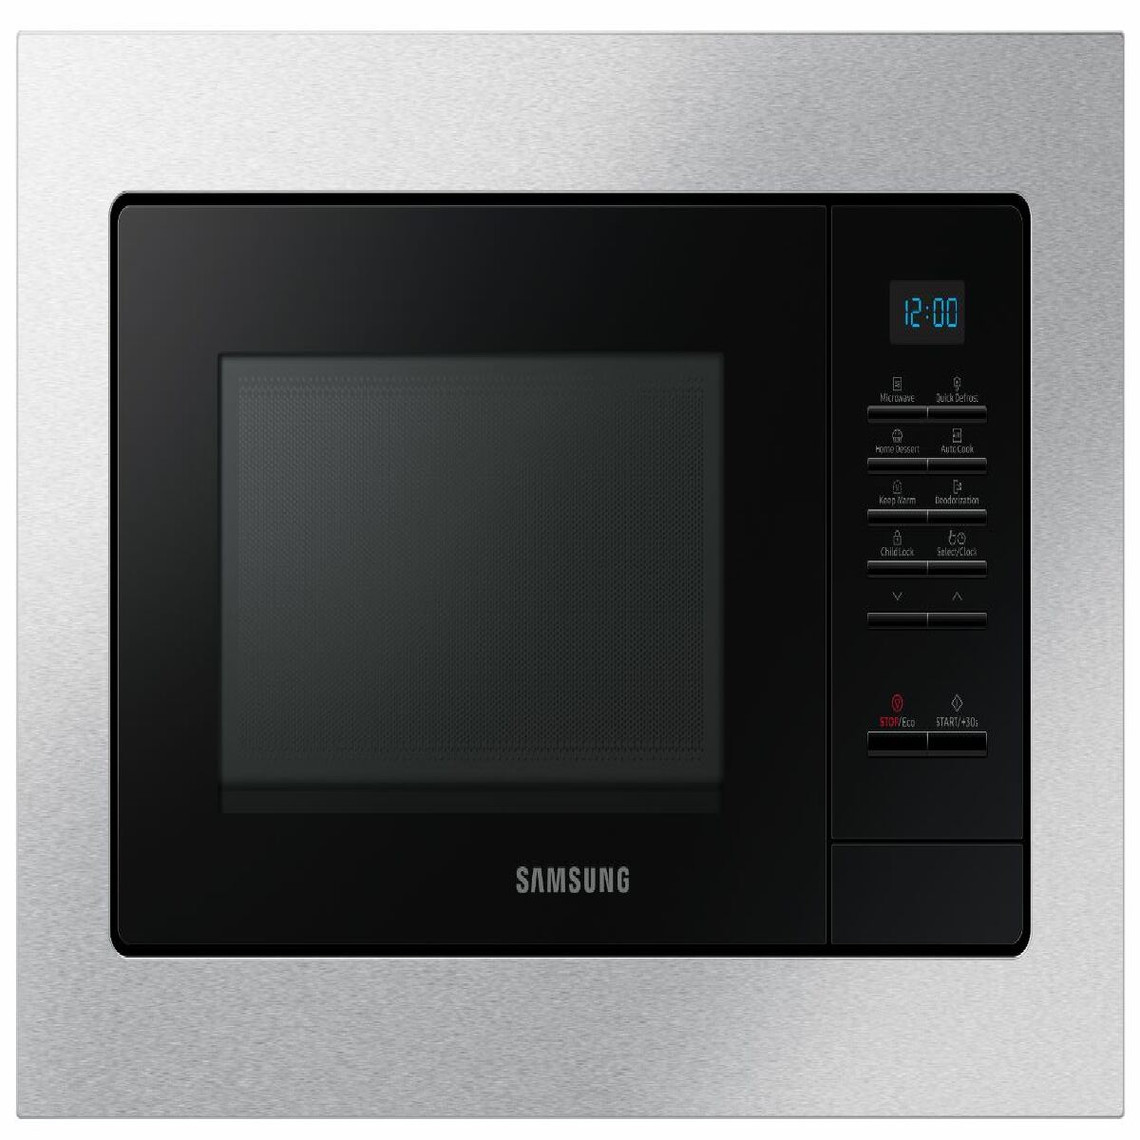 Samsung Micro-ondes solo encastrable 20l 850w inox - ms20a7013at - SAMSUNG